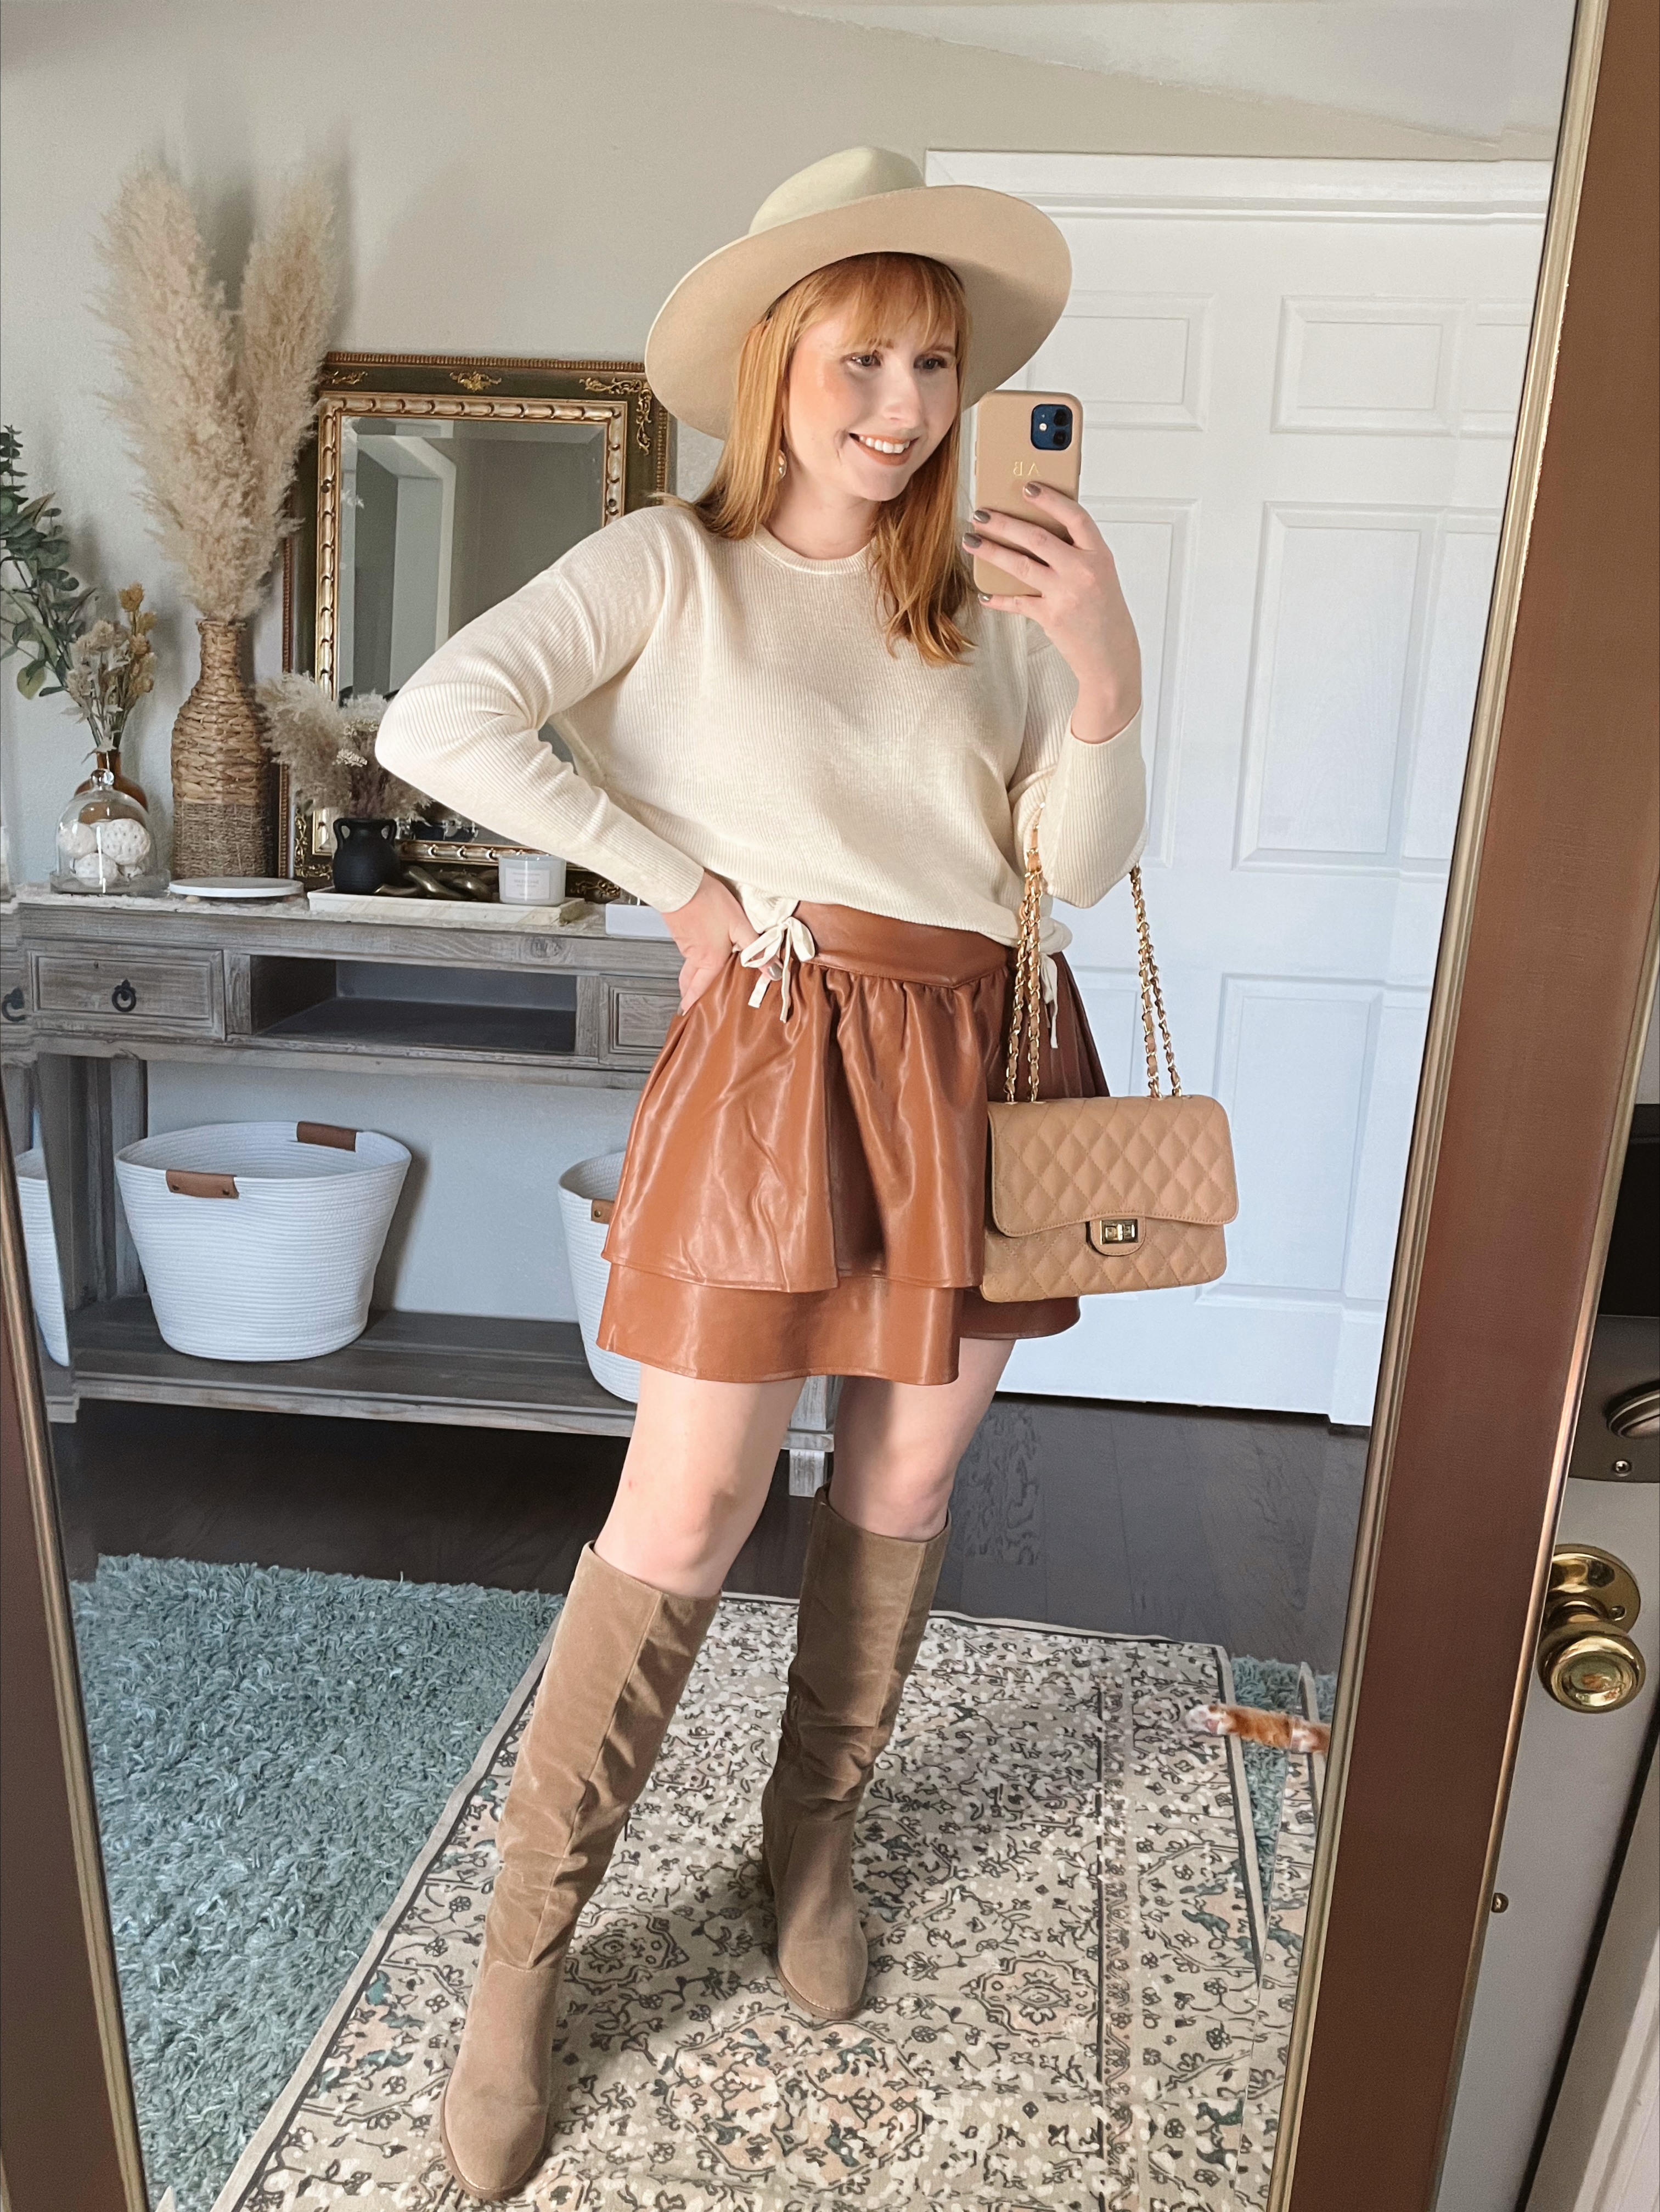 Express Fall Try On Haul. Express Dresses for Fall. Express New Arrivals for Women. Affordable Fall Outfit Ideas 2021.